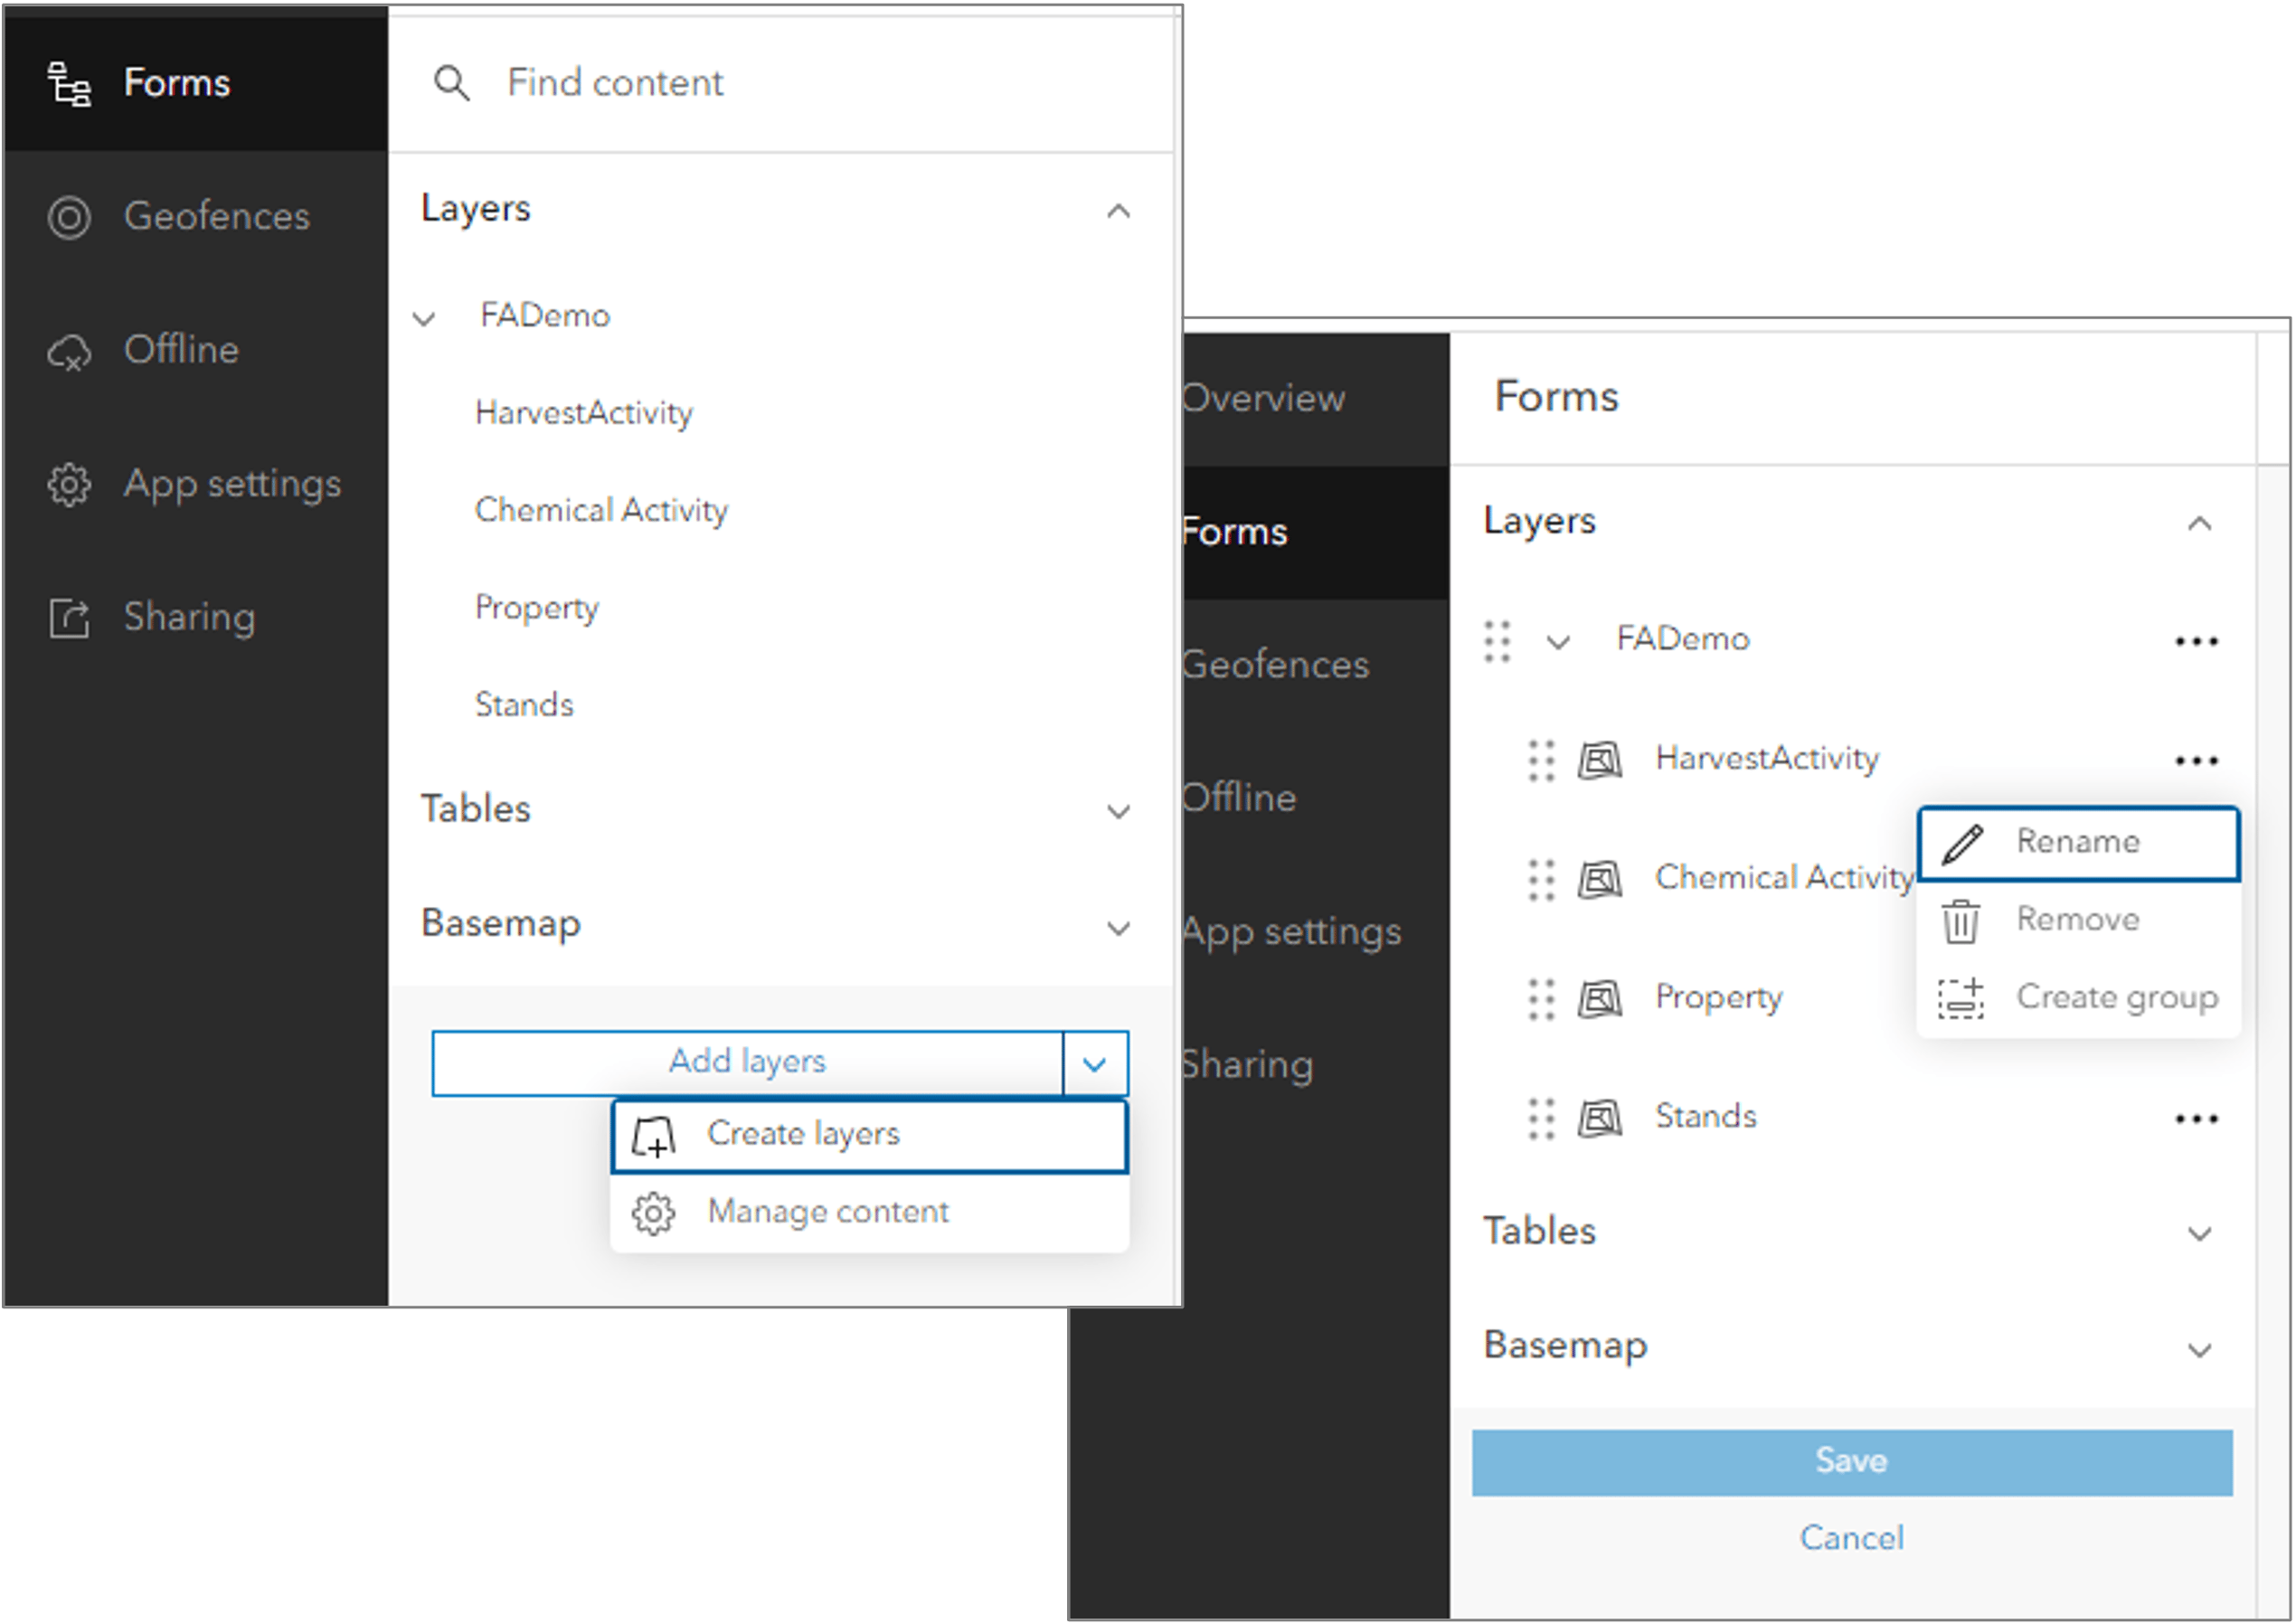 Re-order layers and tables, create and name group layers, and remove layers directly from the manage content experience.